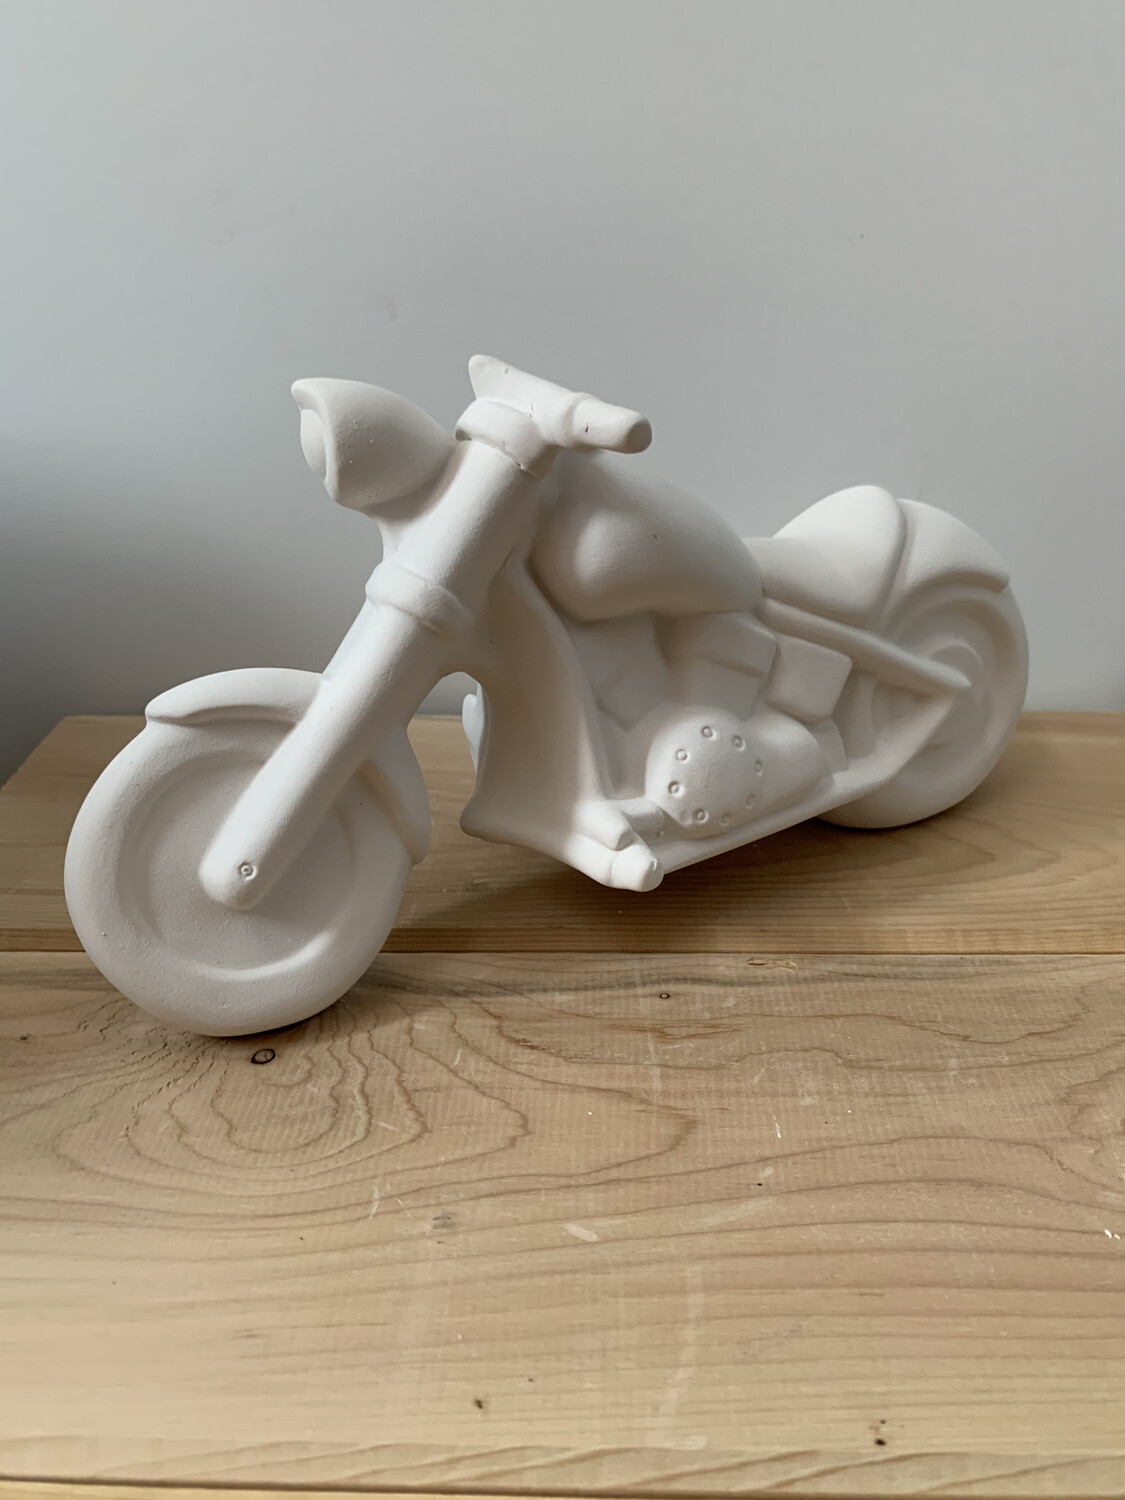 Paint Your Own Pottery - Ceramic
Motorcycle Bank Painting Kit